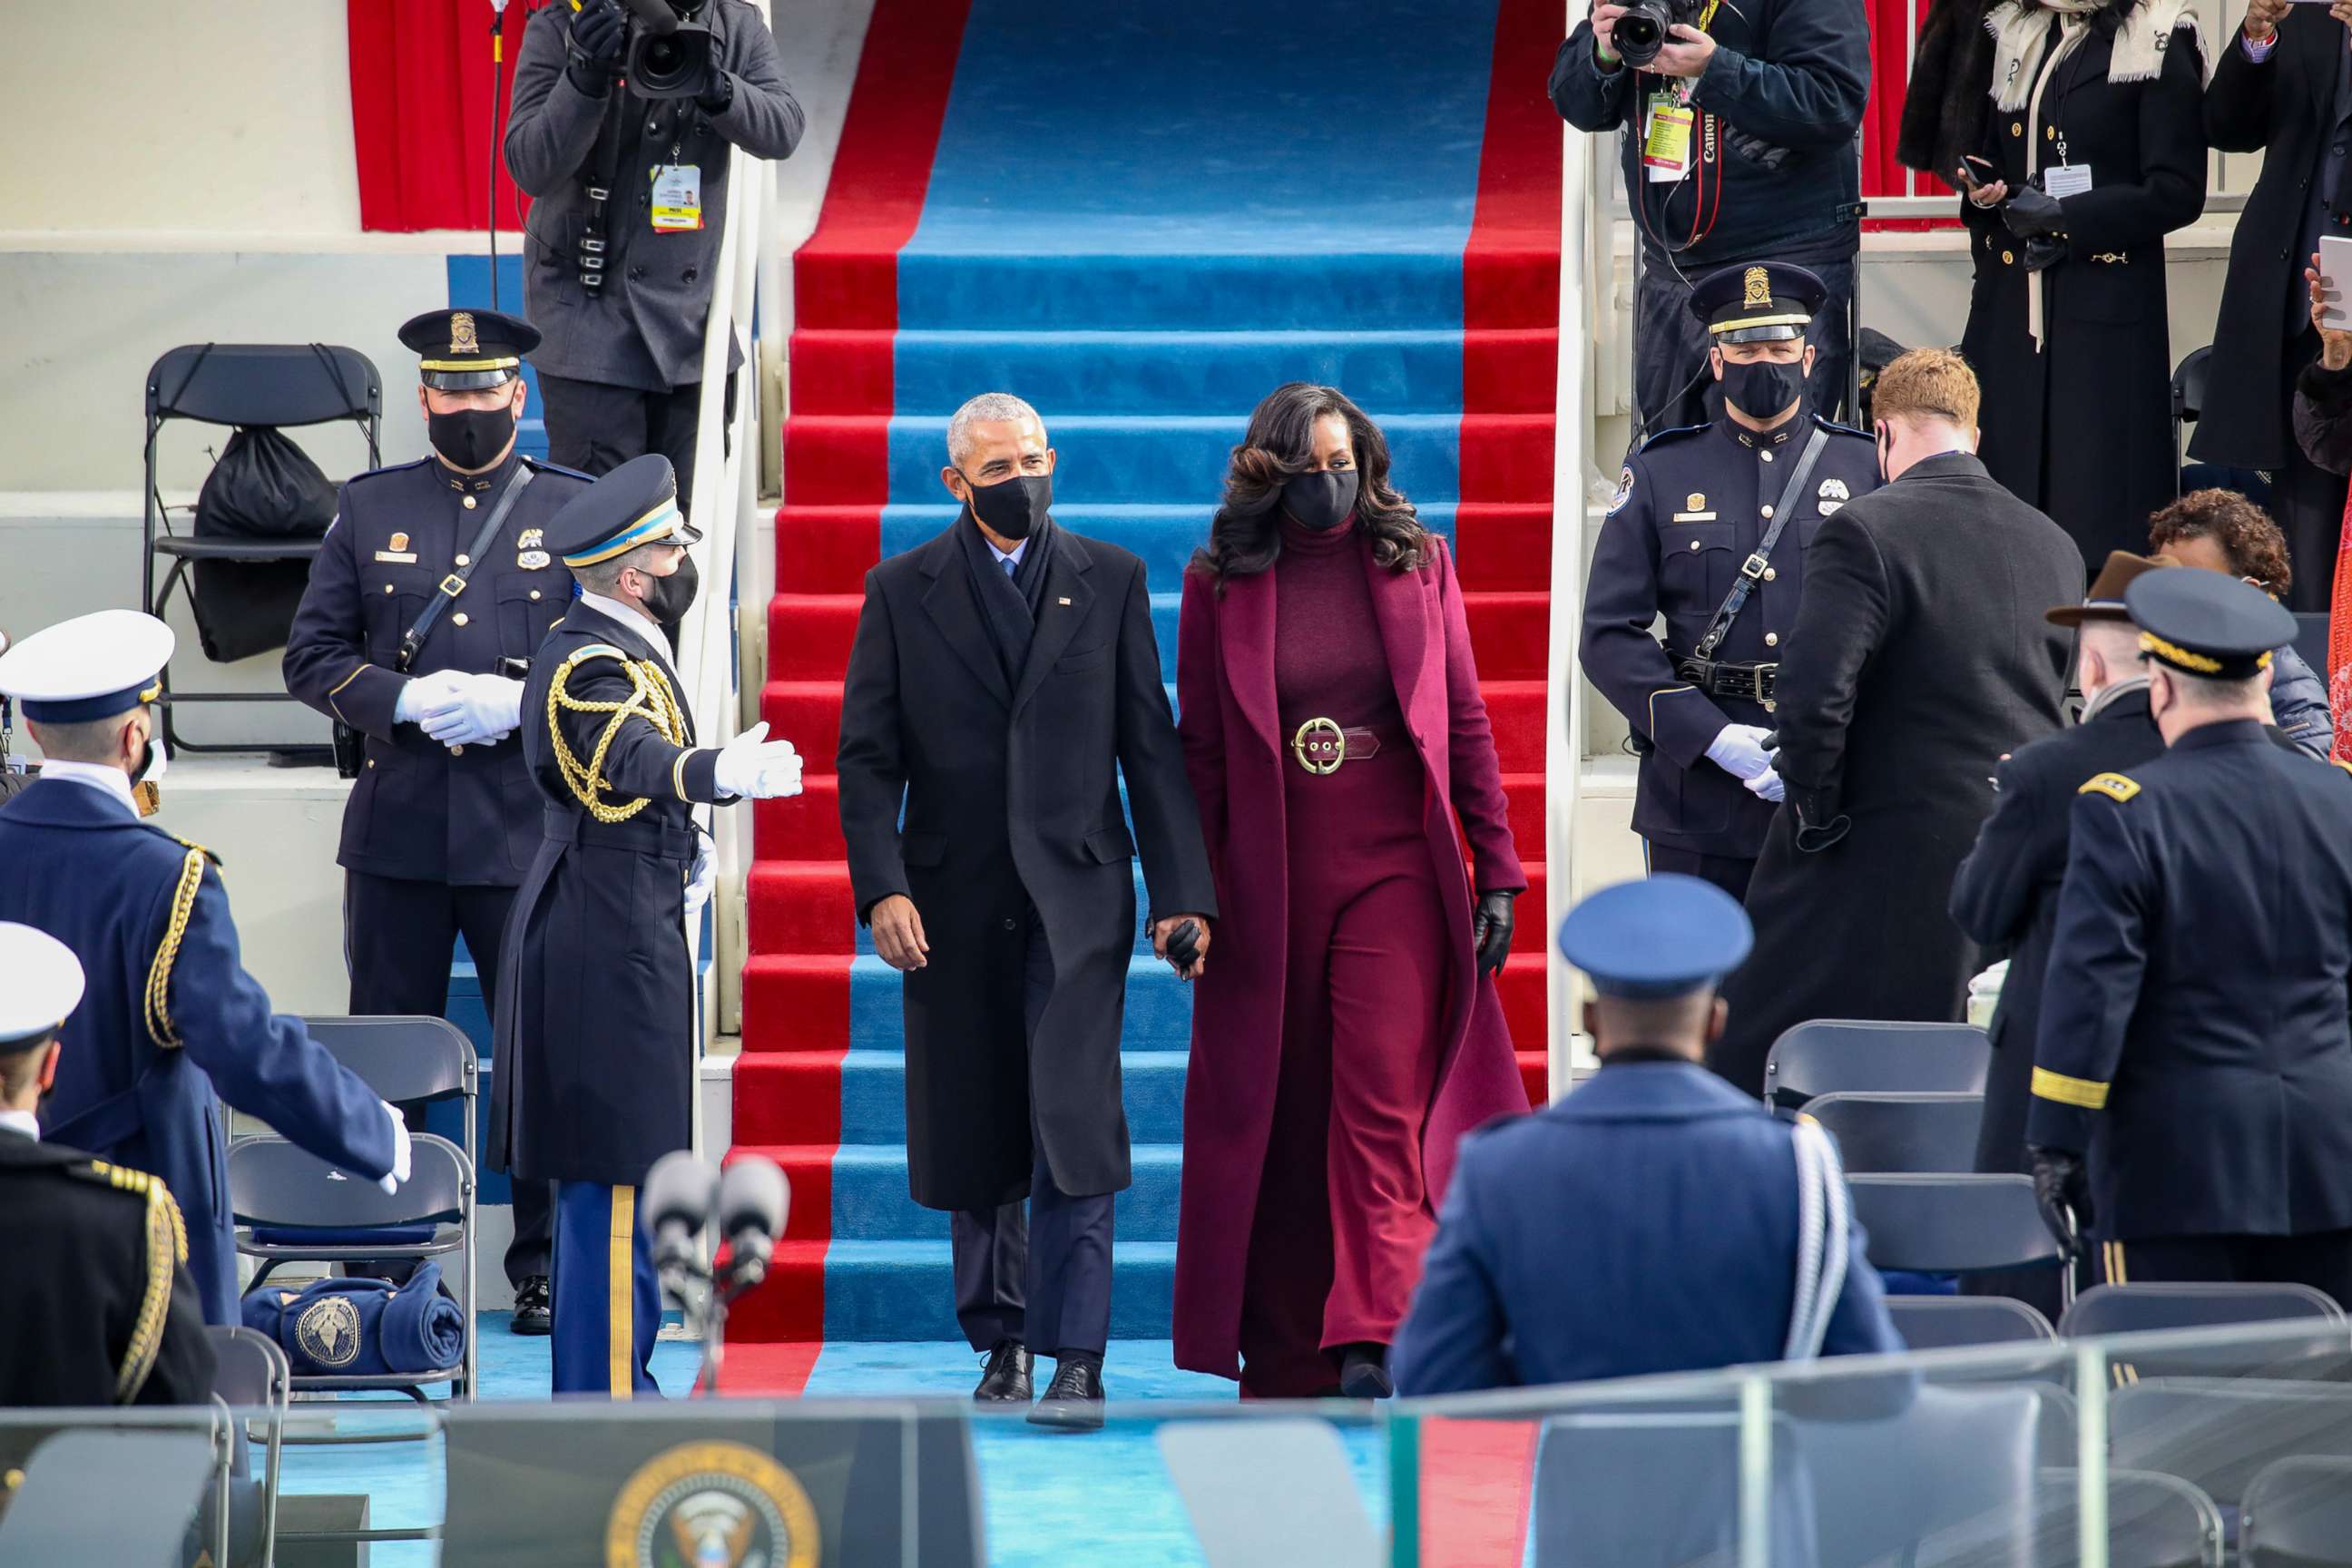 PHOTO: Former President Barack Obama and former first lady Michelle Obama at the inauguration of President-elect Joe Biden on the West Front of the U.S. Capitol on Jan. 20, 2021, in Washington.